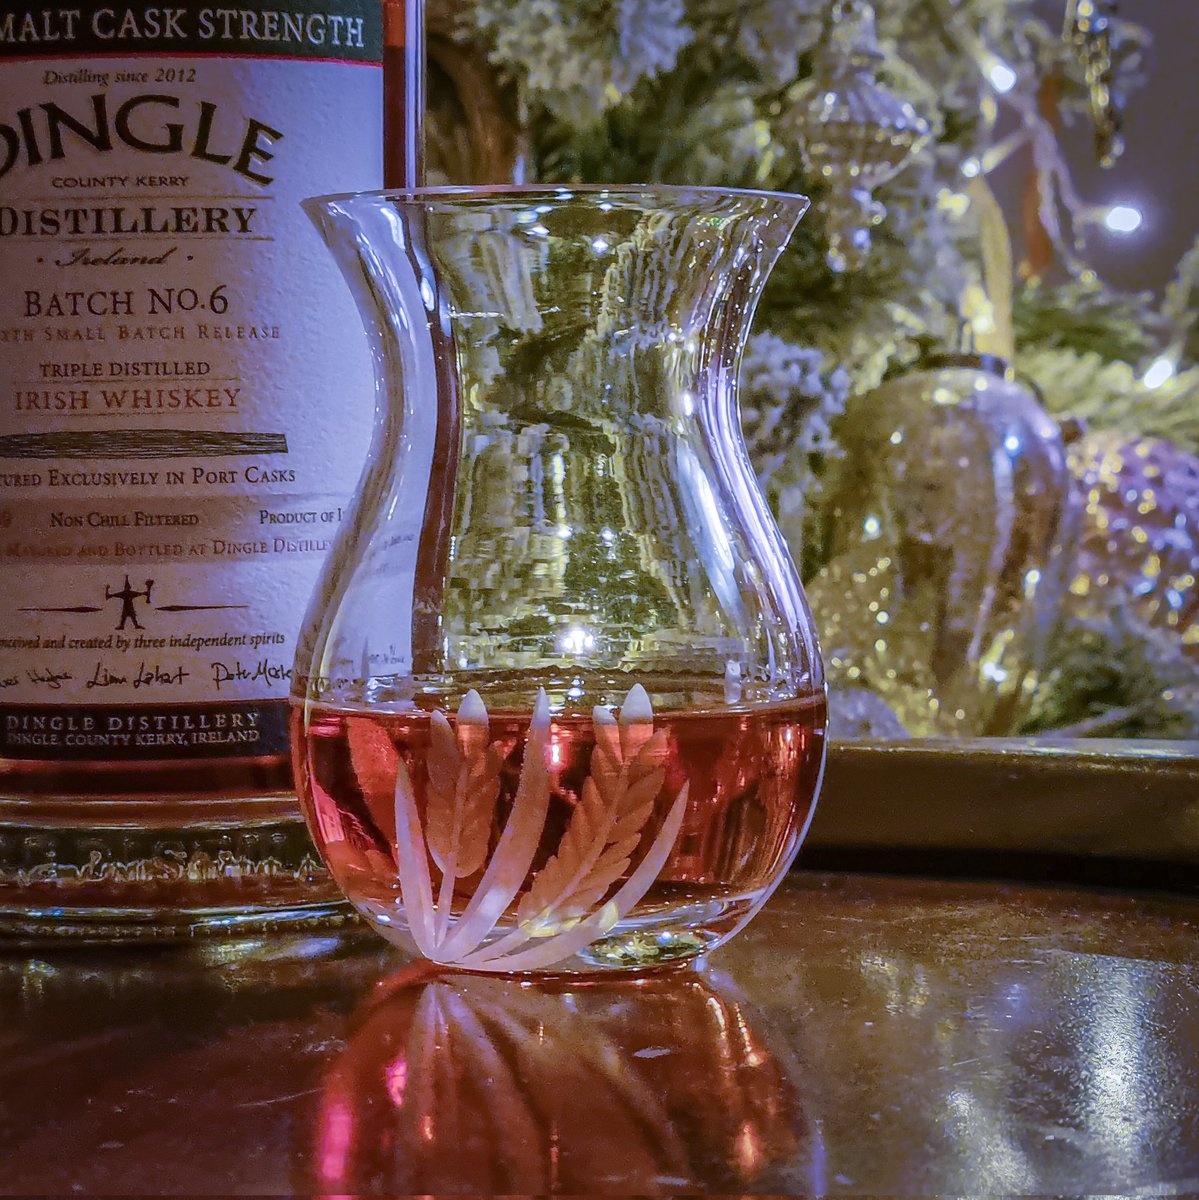 This exquisite piece of craftsmanship is from the guys in Dingle Crystal. Beautiful weight to this class. A great glass for drinking whiskey. It's my first drink with this so it had to be the Cask Strength Batch No 6 Dingle whiskey. #dingle #dingledistillery #dinglewhiskey